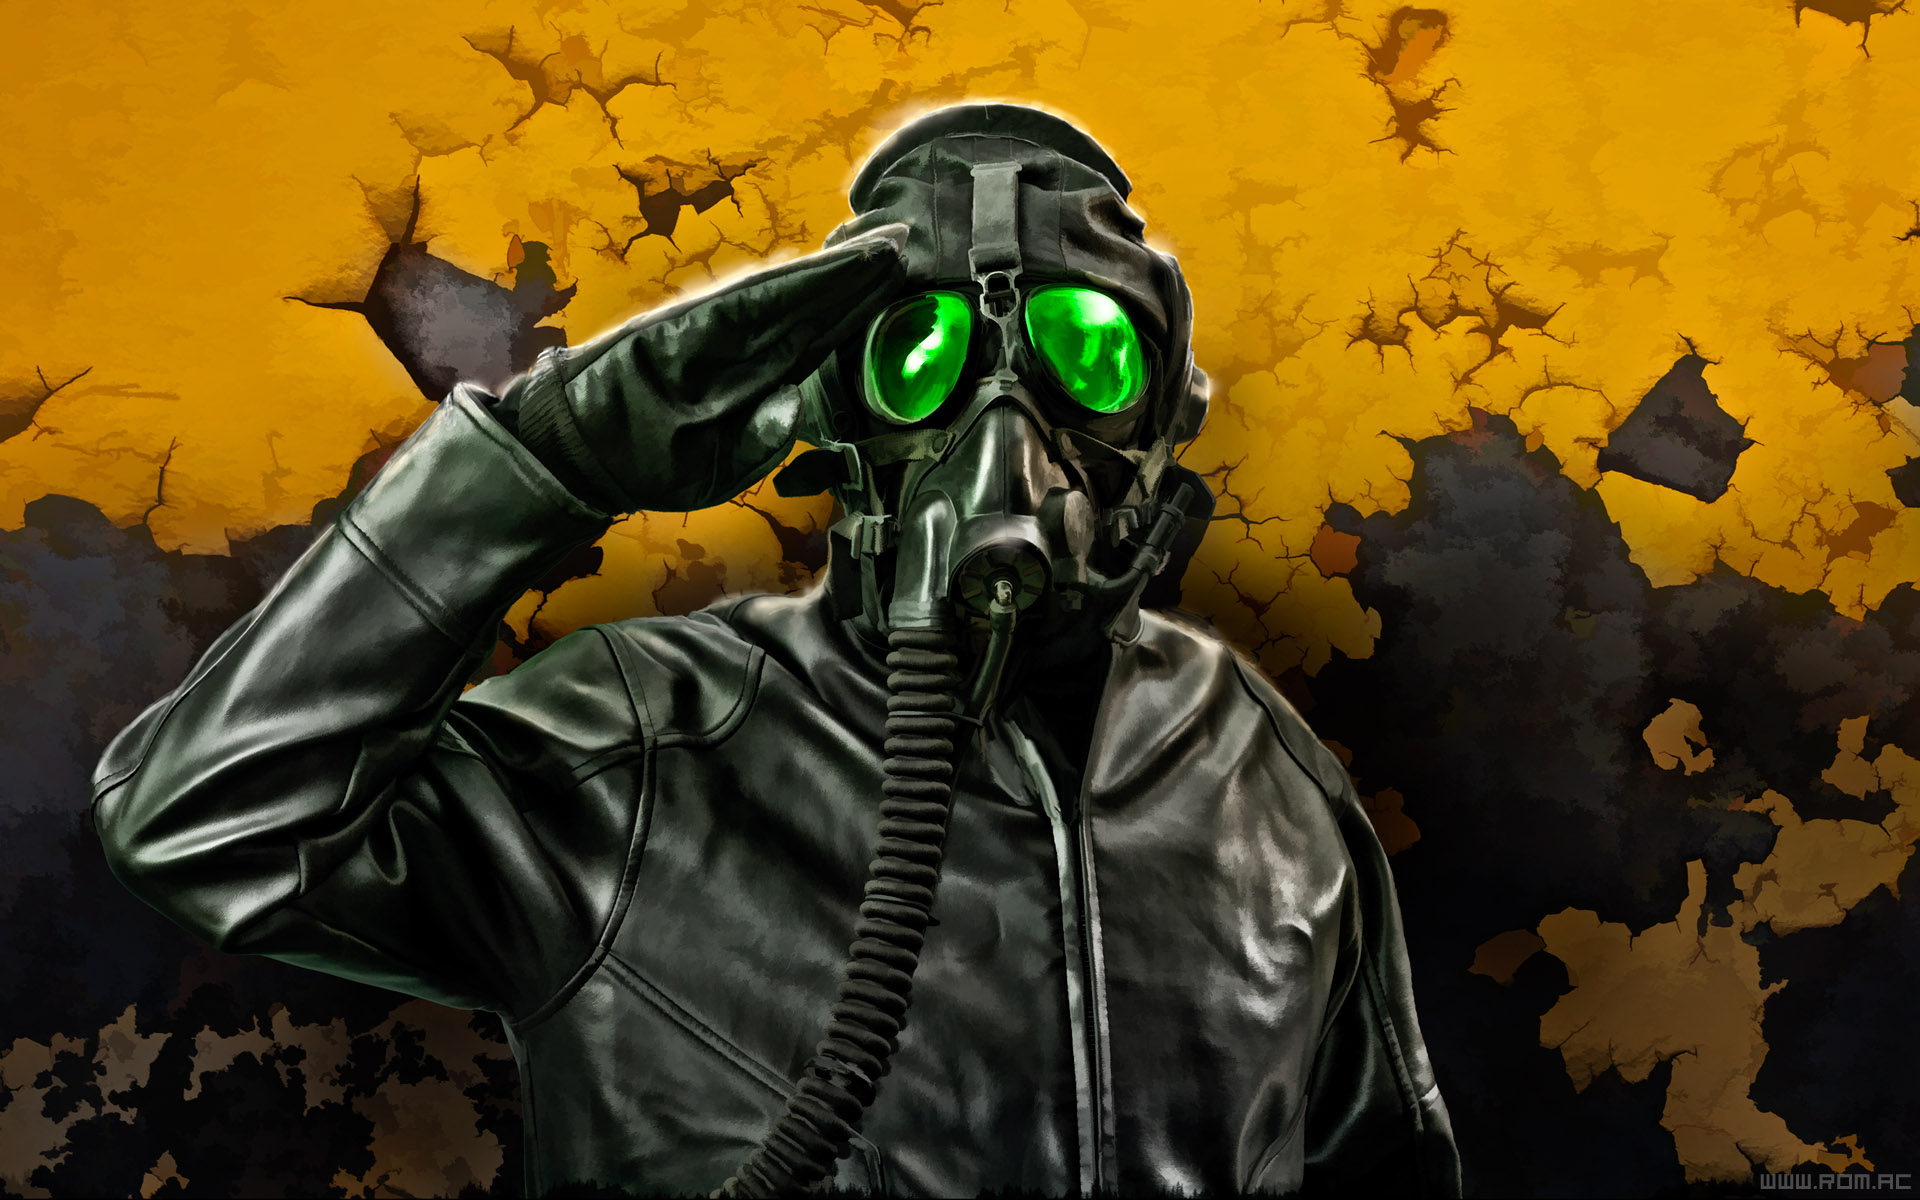 References Gas Masks Dark Knight And Concept Art